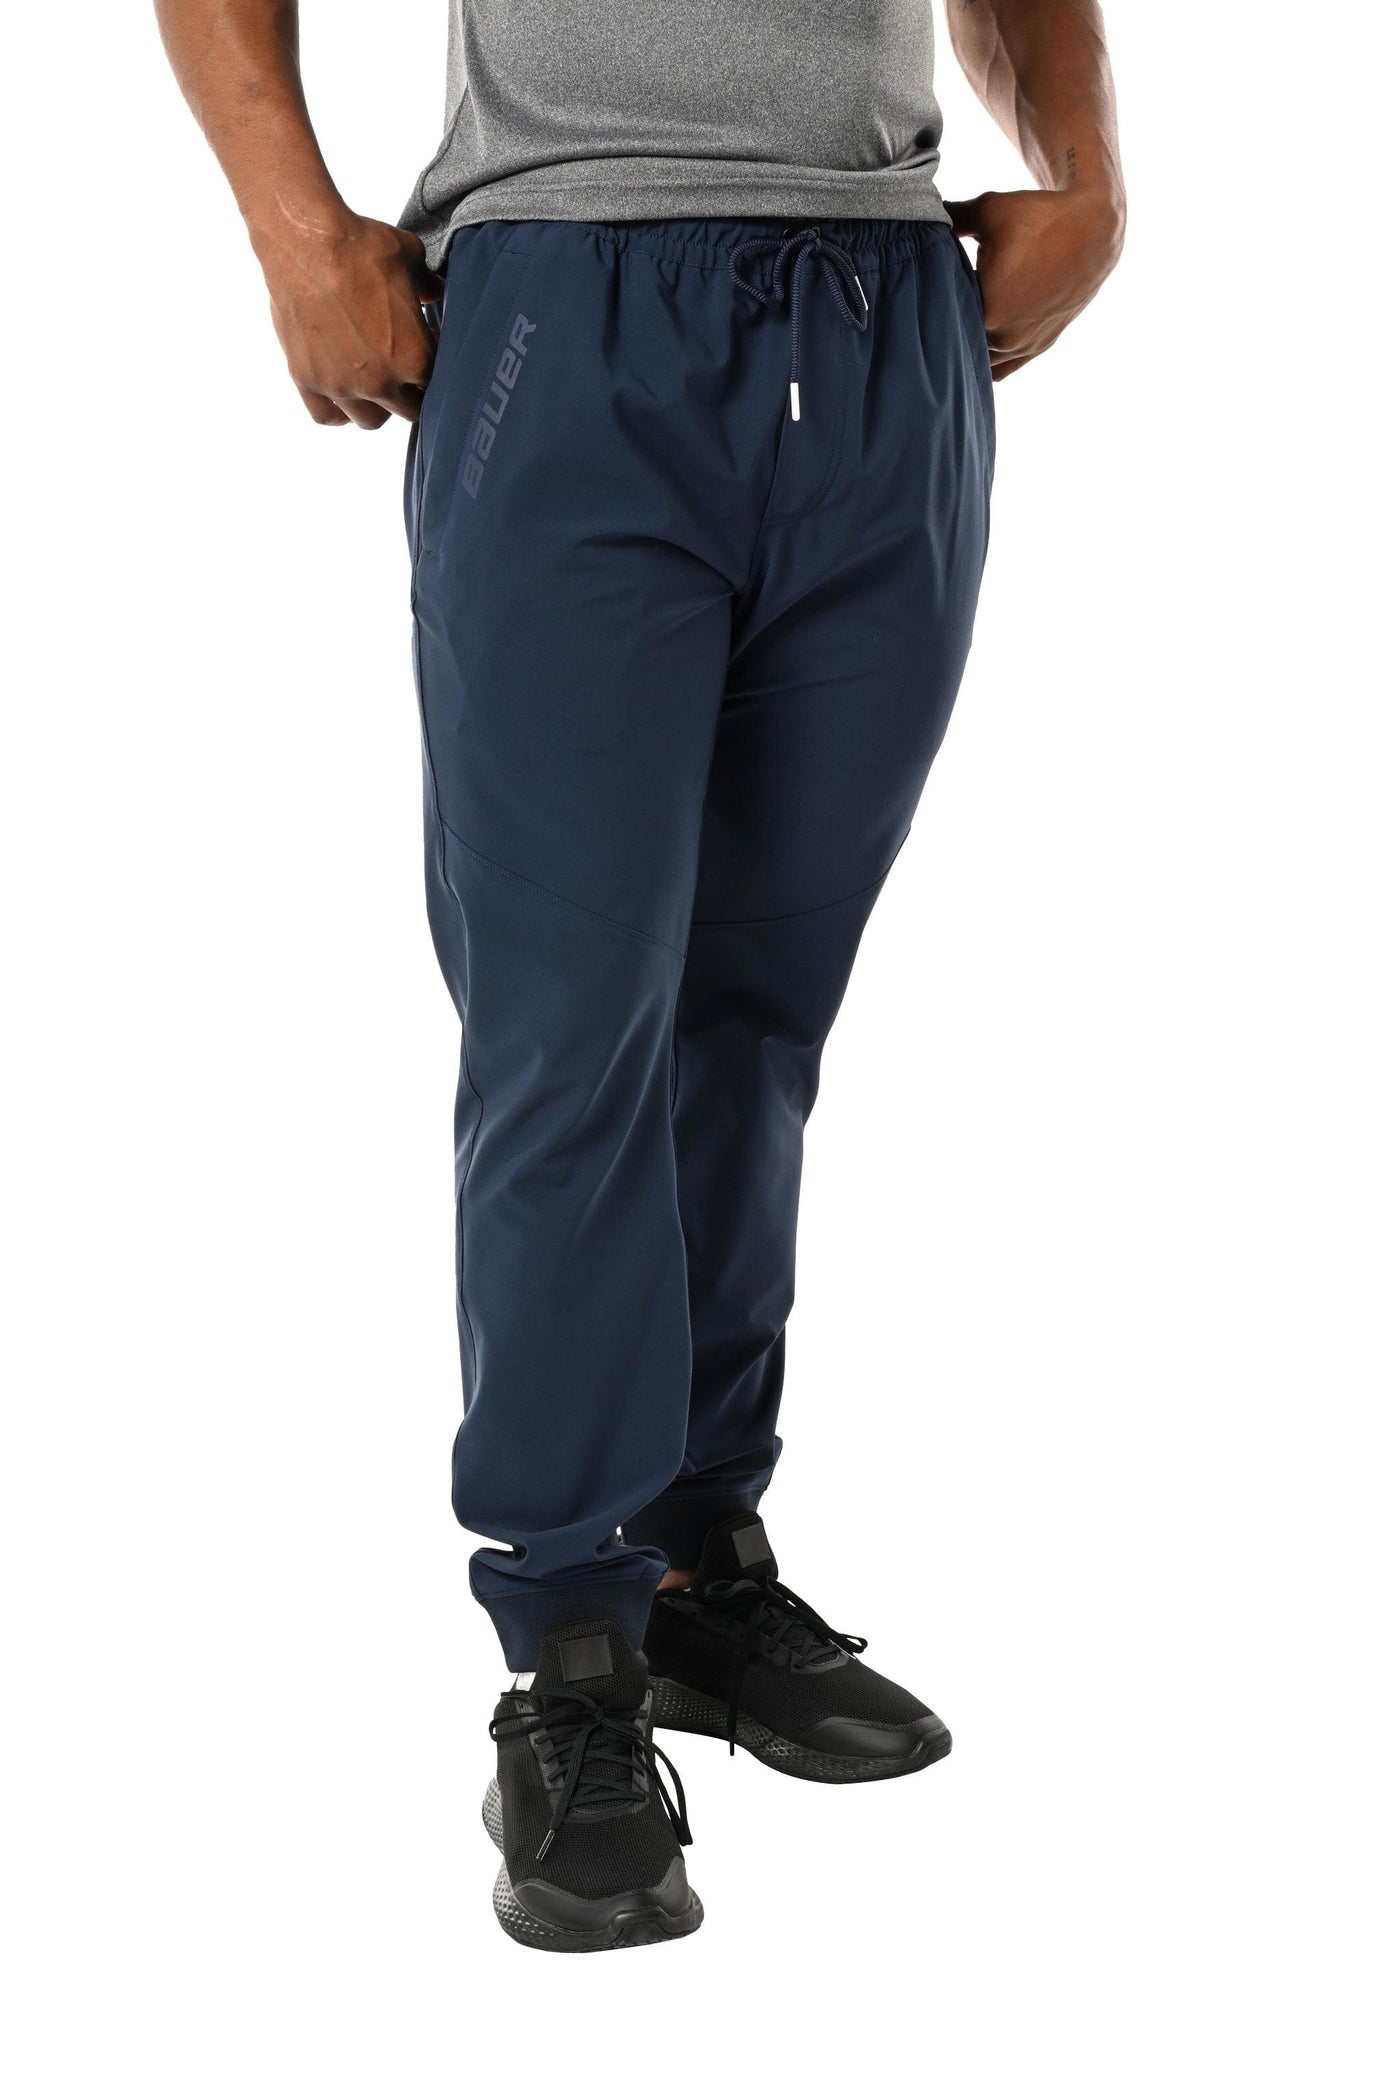 Jockey 2xl Imperial Blue Mens Track Pants - Get Best Price from